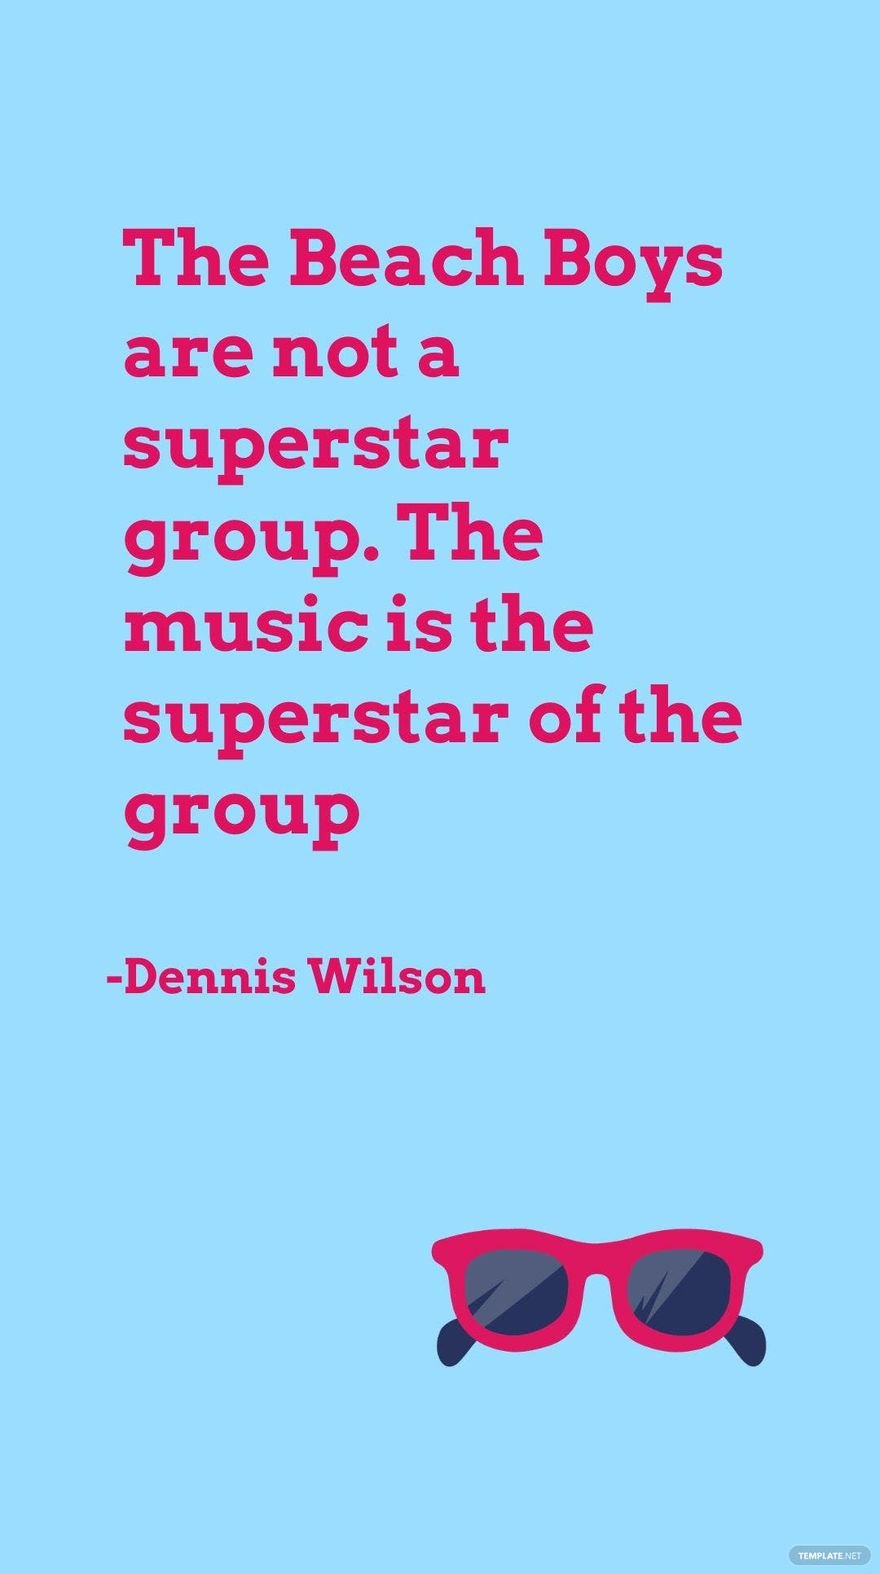 Dennis Wilson - The Beach Boys are not a superstar group. The music is the superstar of the group